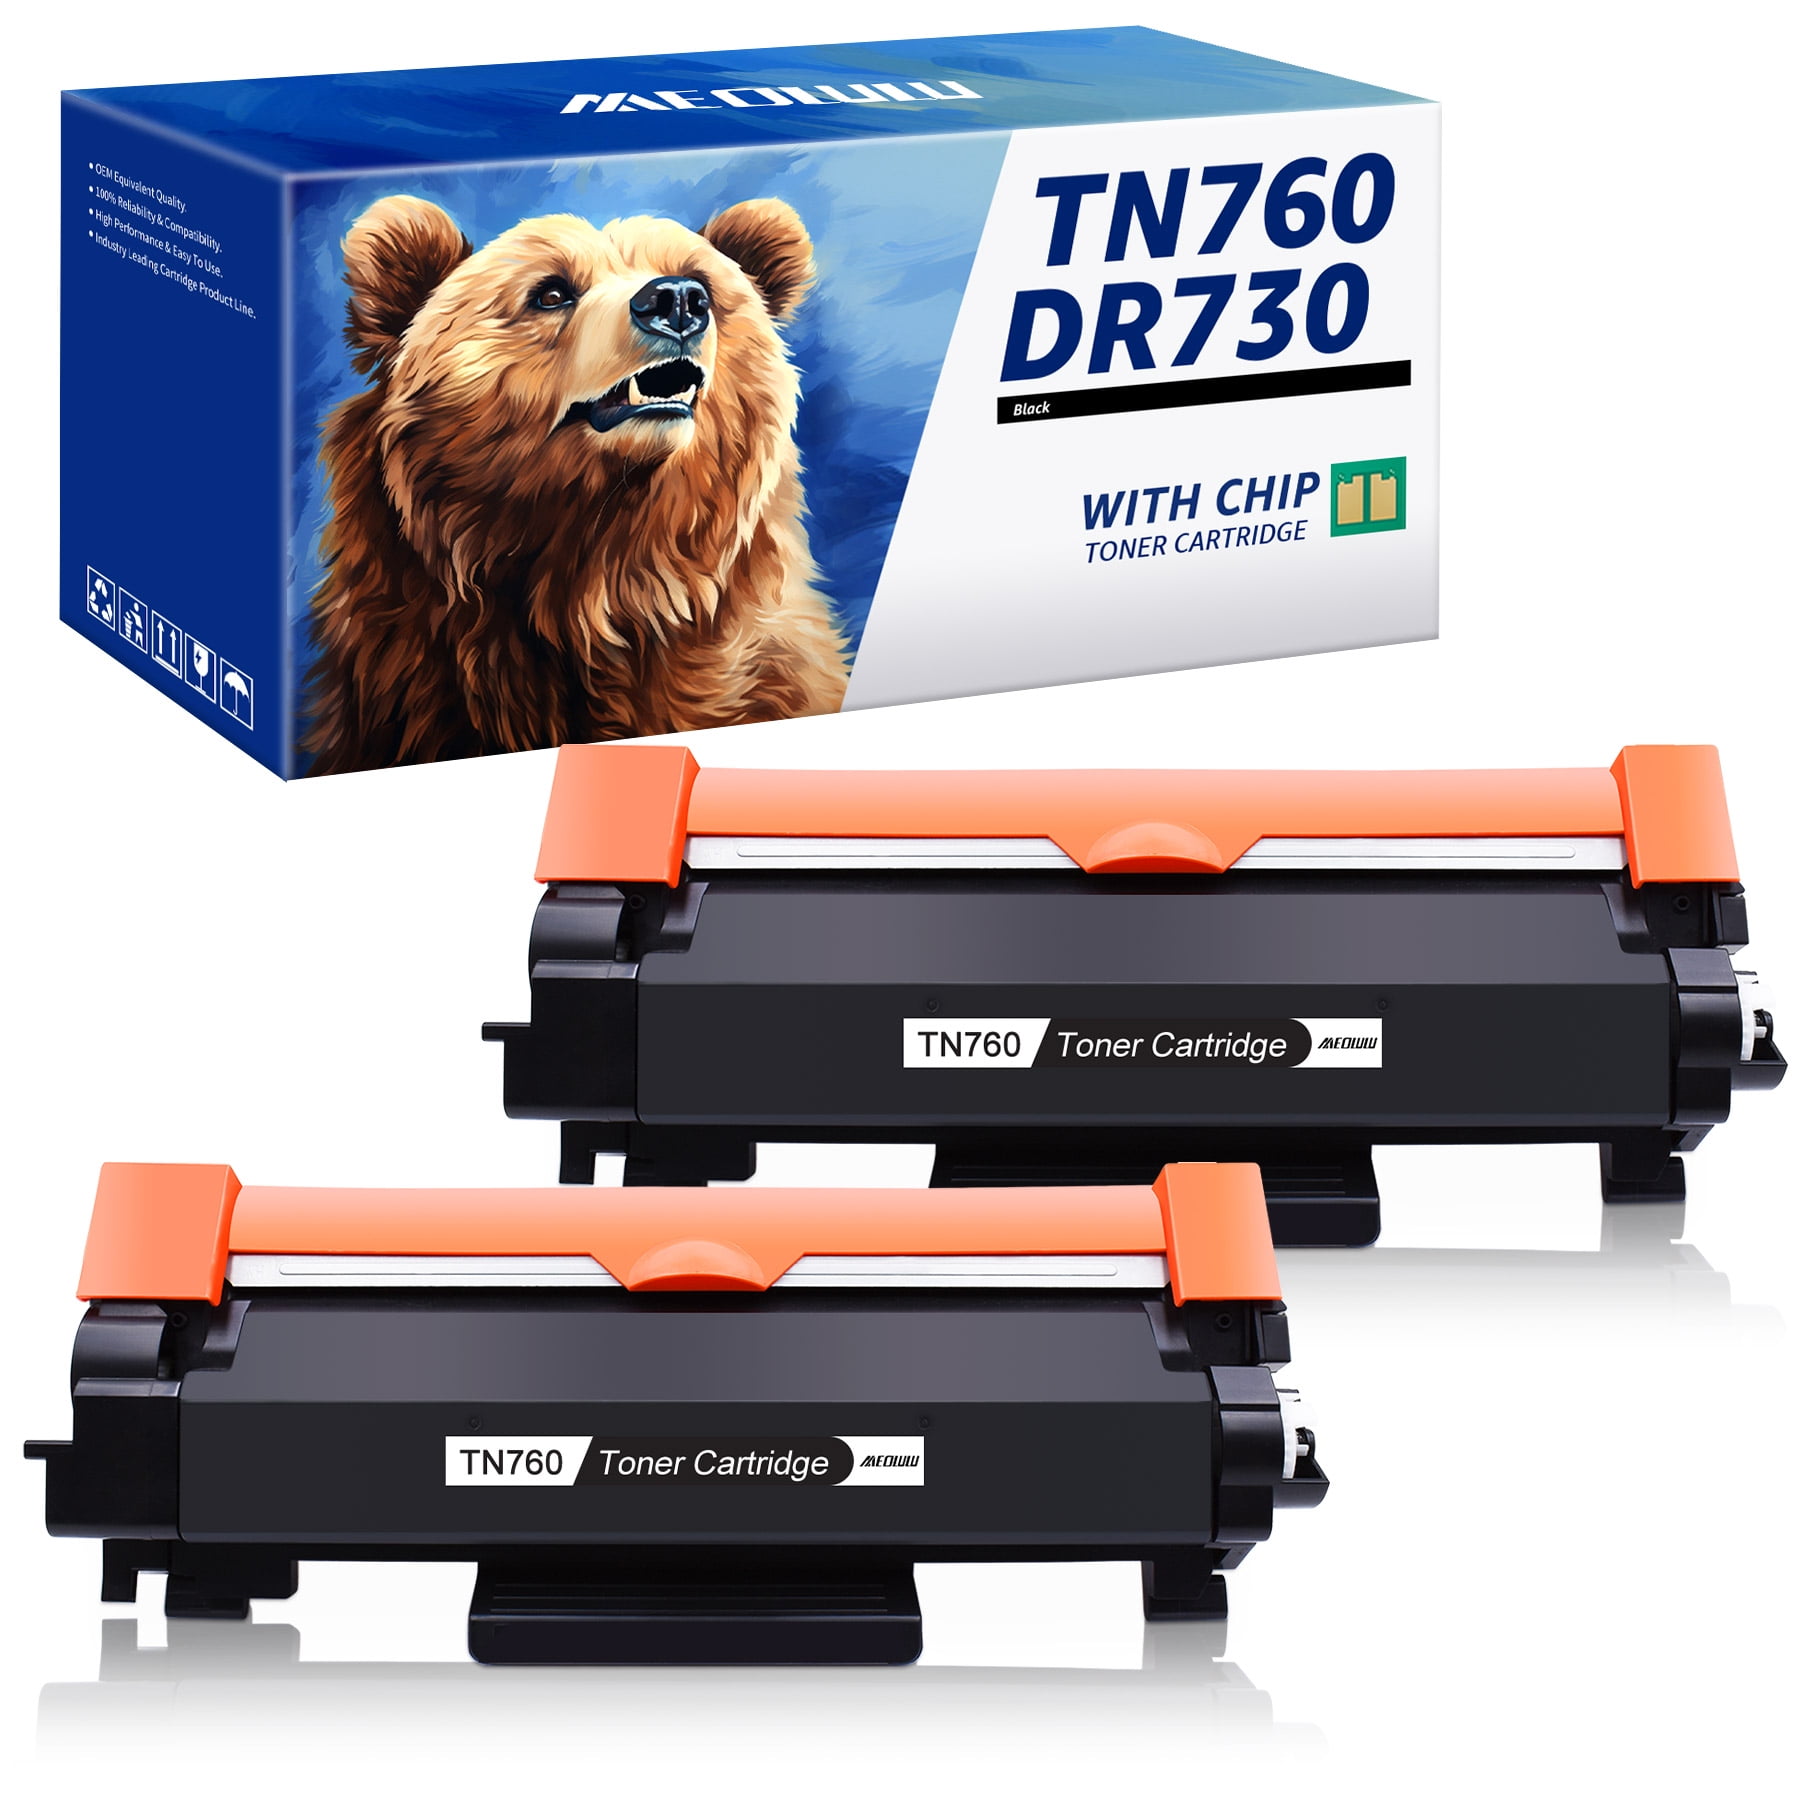 TN-760 Toner DR-730 Compatible With Brother MFC-L2710DW MFC